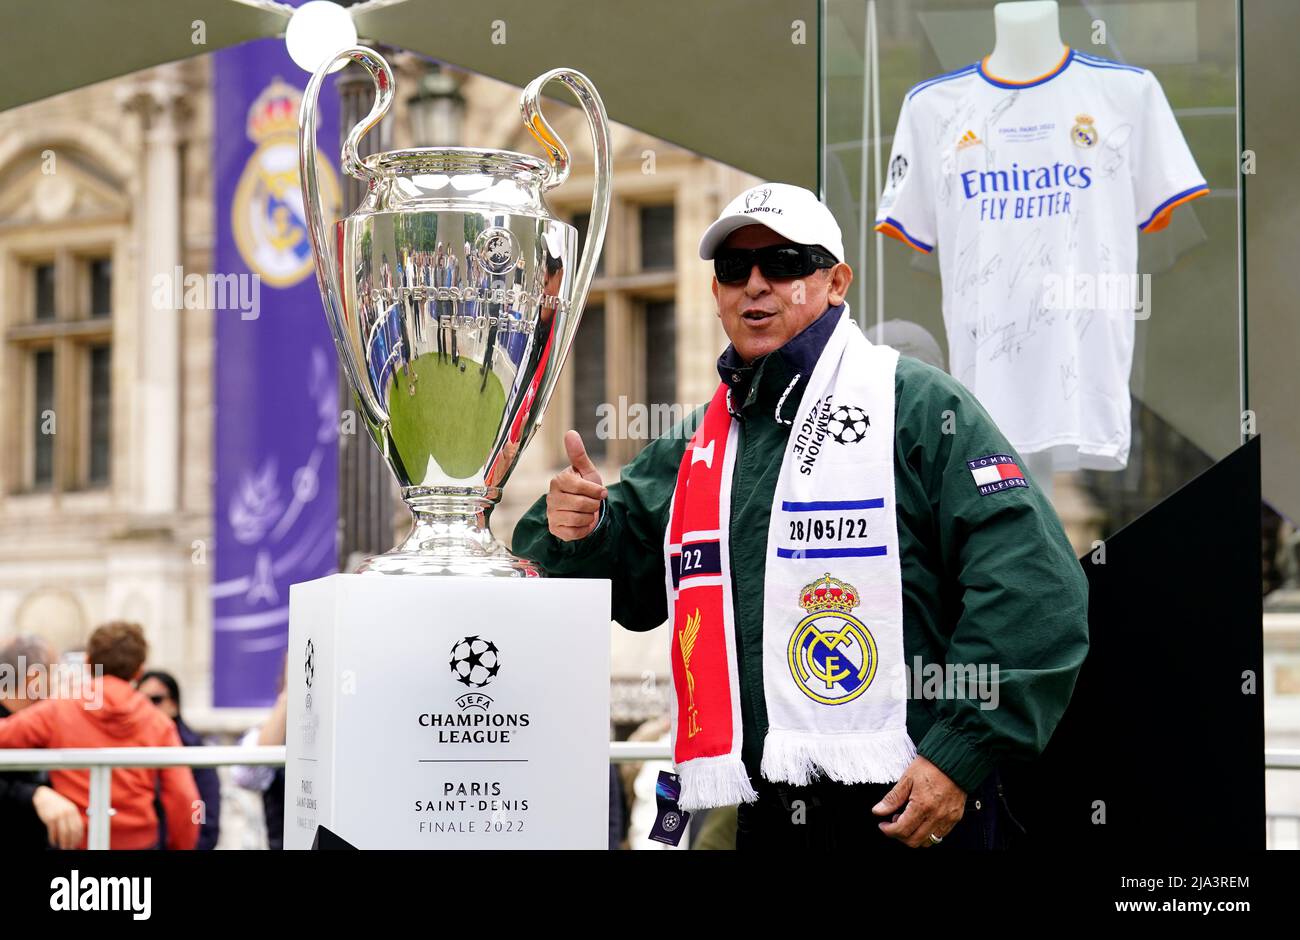 A fan poses next to the UEFA Champions League trophy at the Trophy Experience at The Place de l'Hotel de Ville in Paris ahead of Saturday's UEFA Champions League Final at the Stade de France, Paris. Picture date: Friday May 27, 2022. Stock Photo